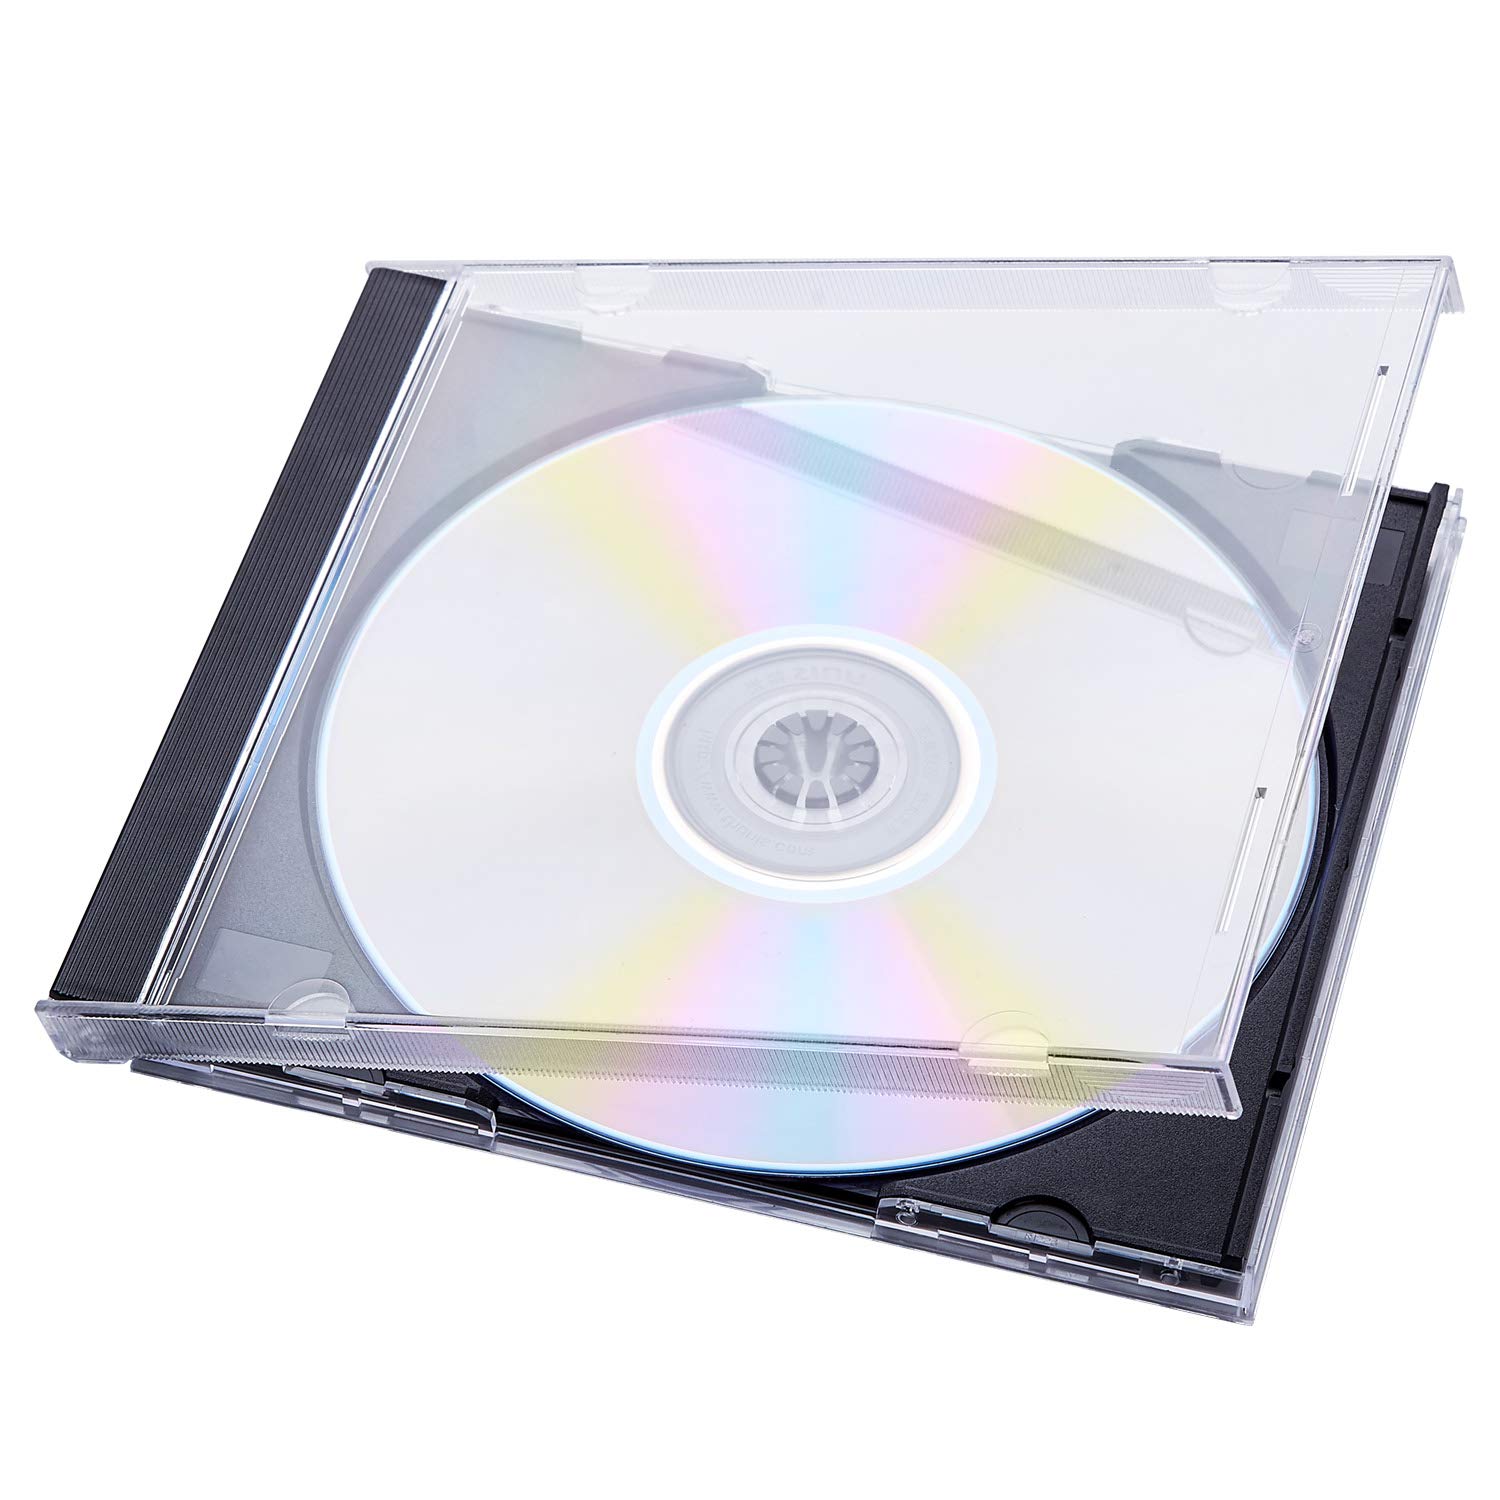 Maxtek 10.4 mm Standard Single Clear CD Jewel Case with Assembled Black Tray, 10 Pack